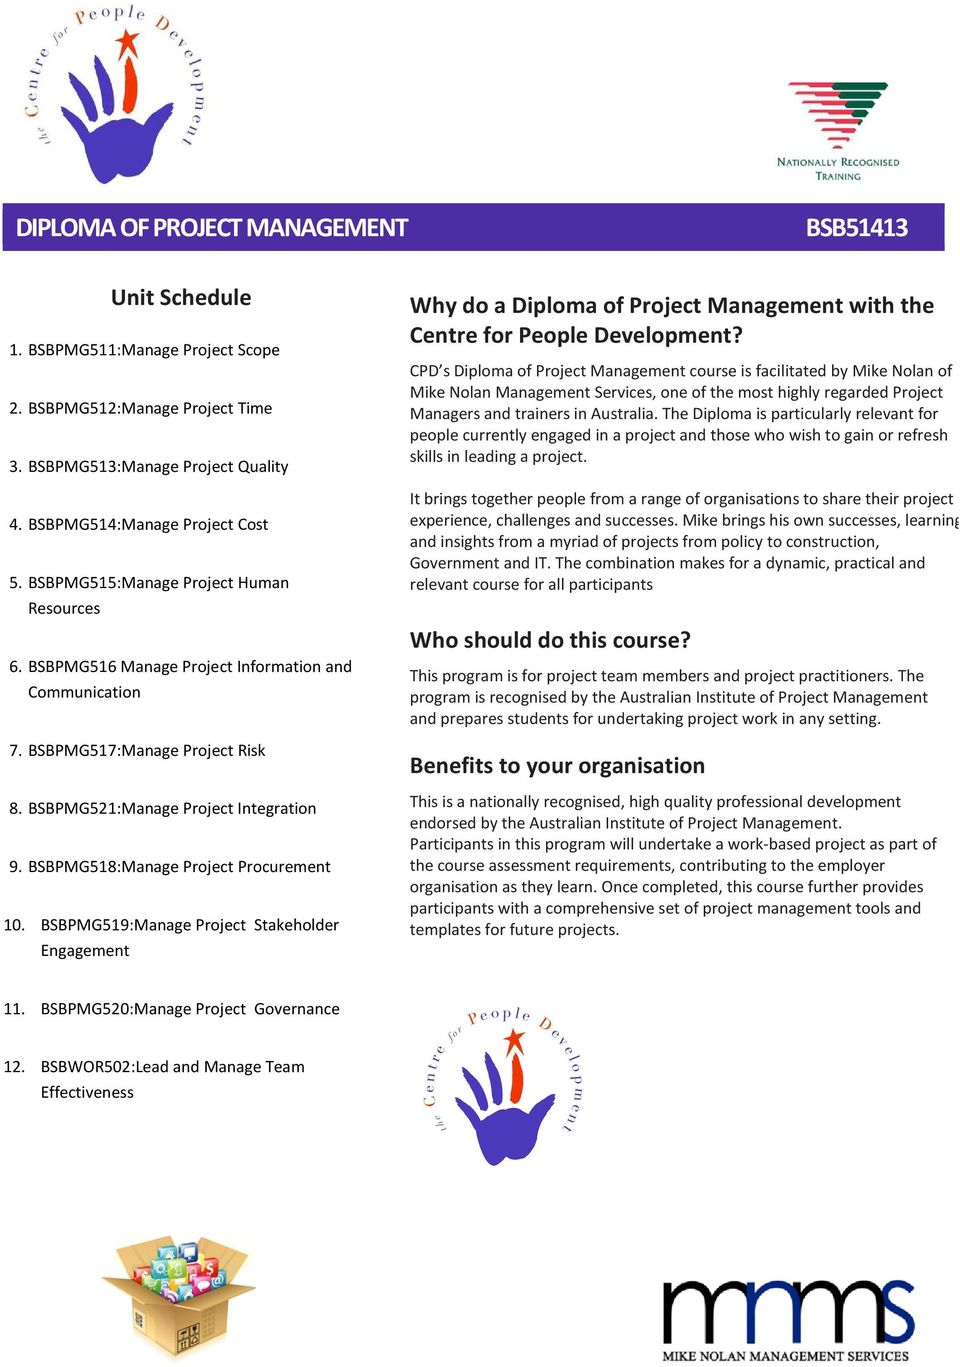 BSBPMG518:Manage Project Procurement 10. BSBPMG519:Manage Project Stakeholder Engagement Why do a Diploma of Project Management with the Centre for People Development?